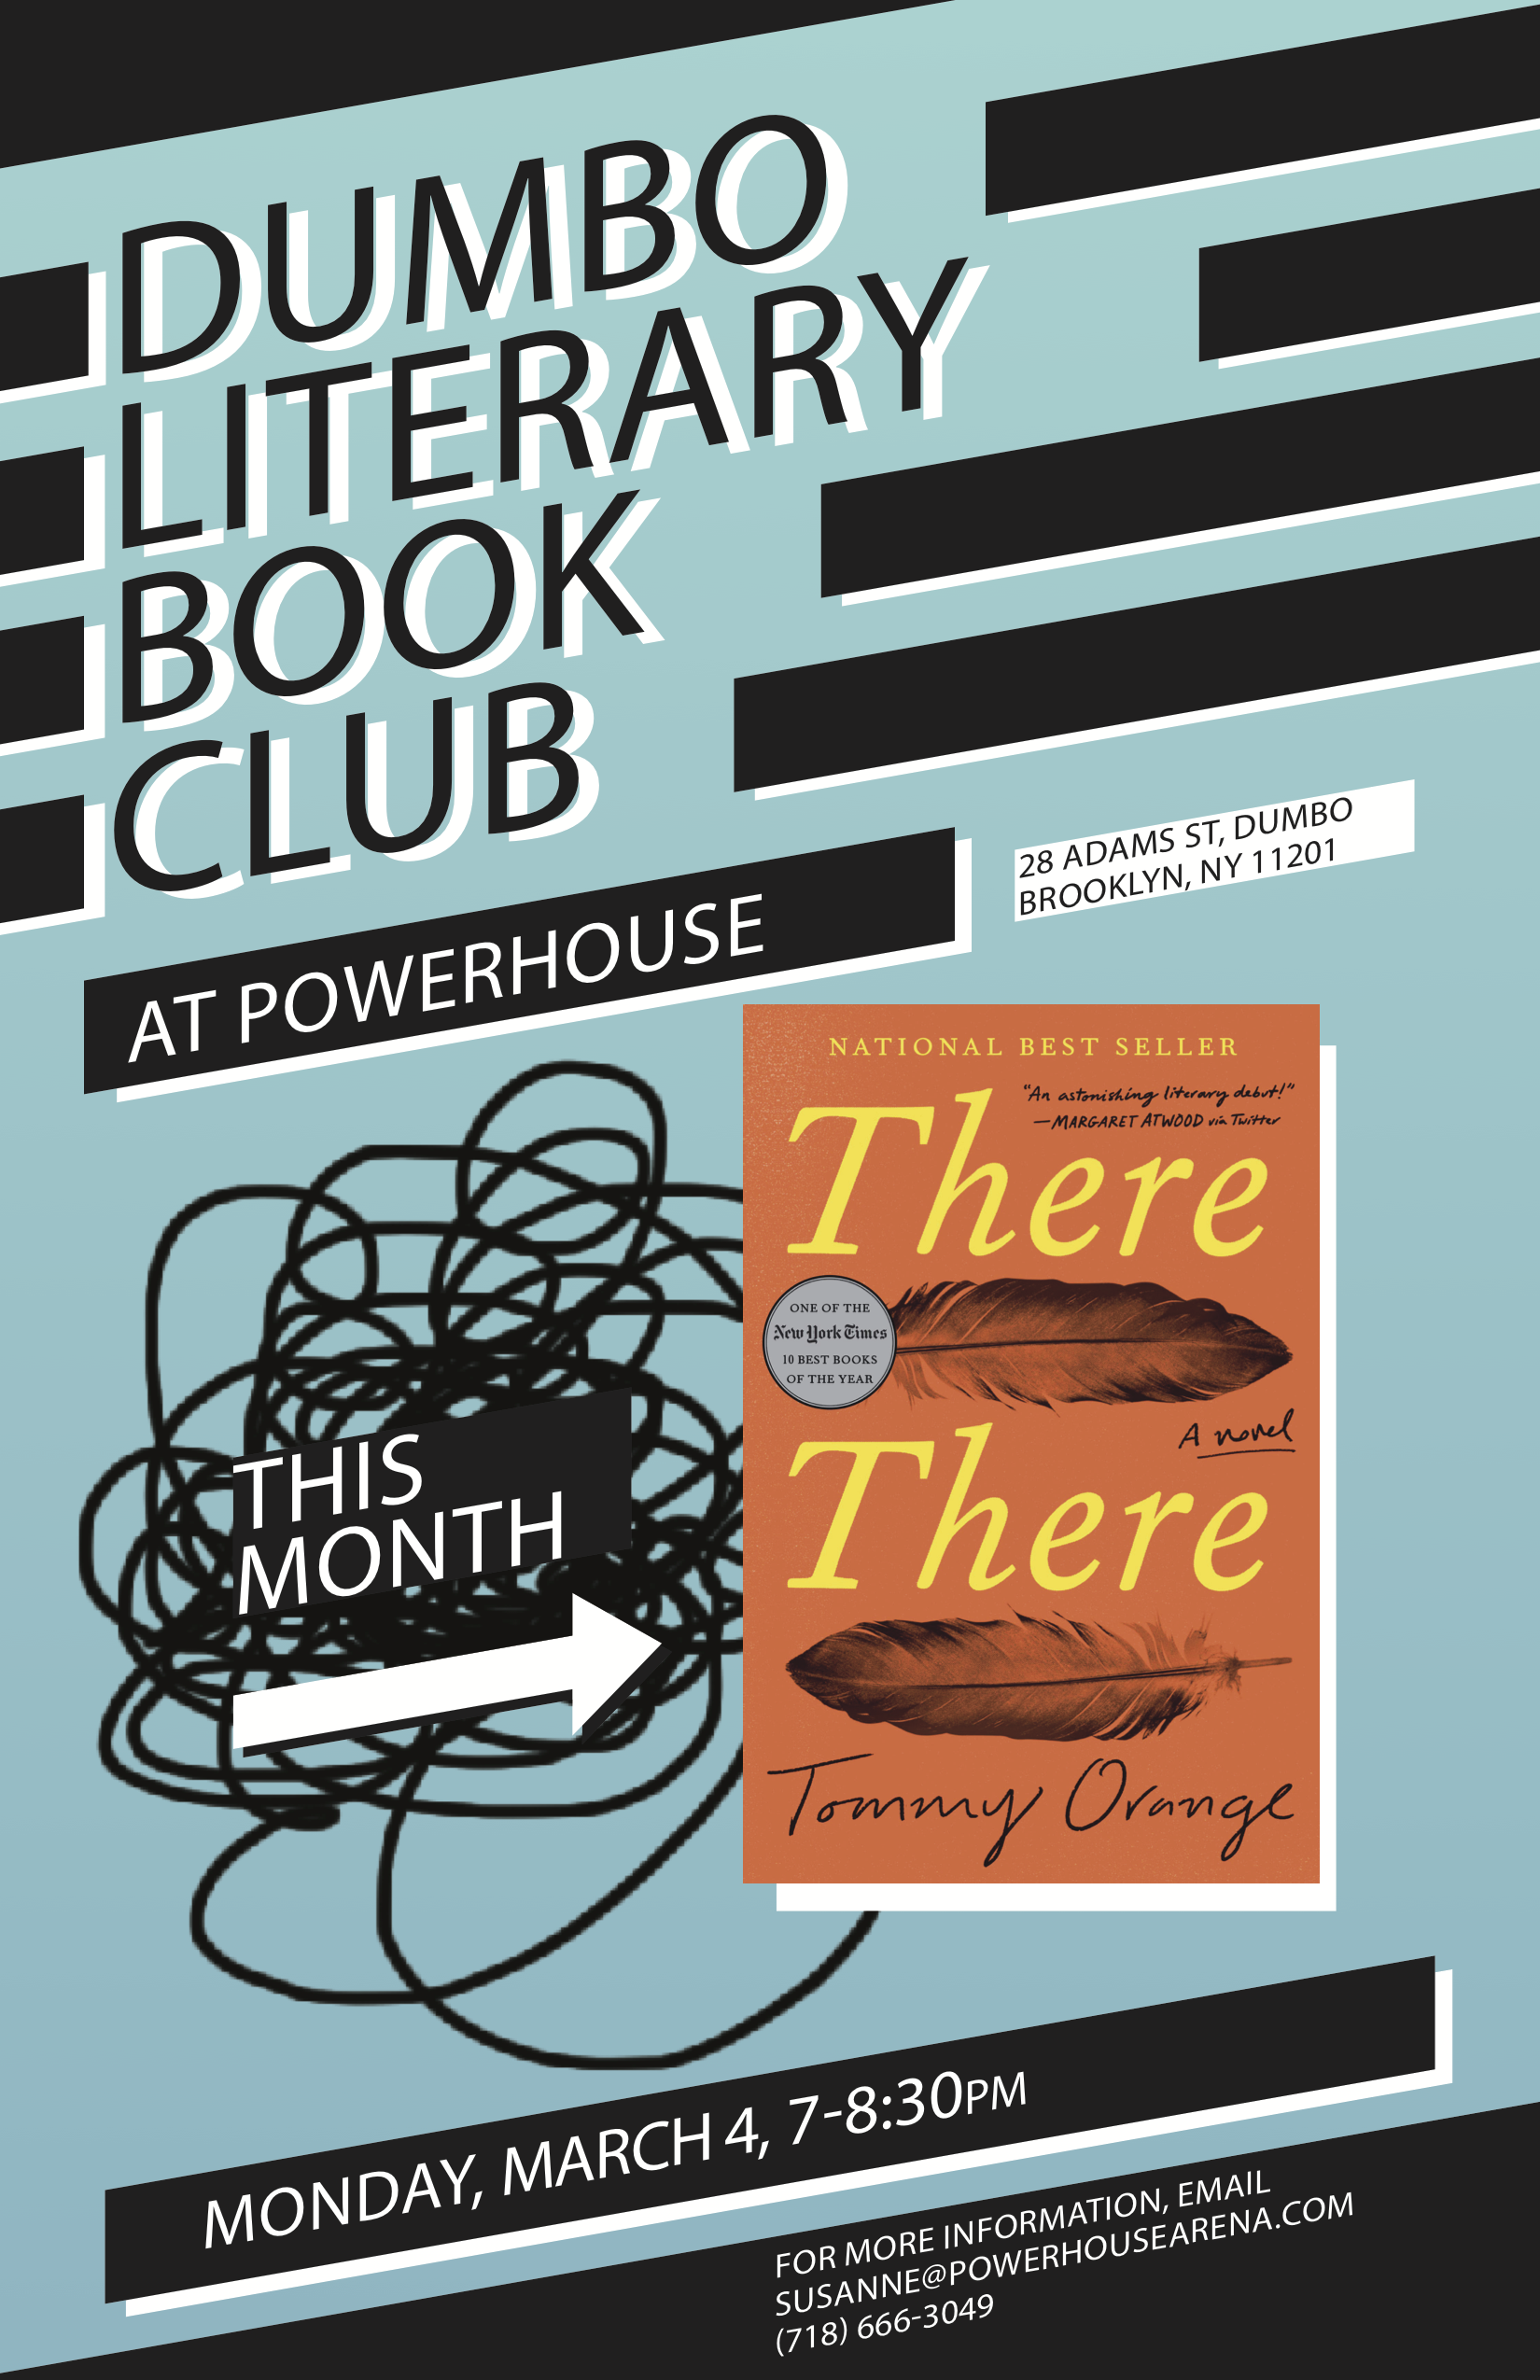 Dumbo Lit Book Club: There There by Tommy Orange